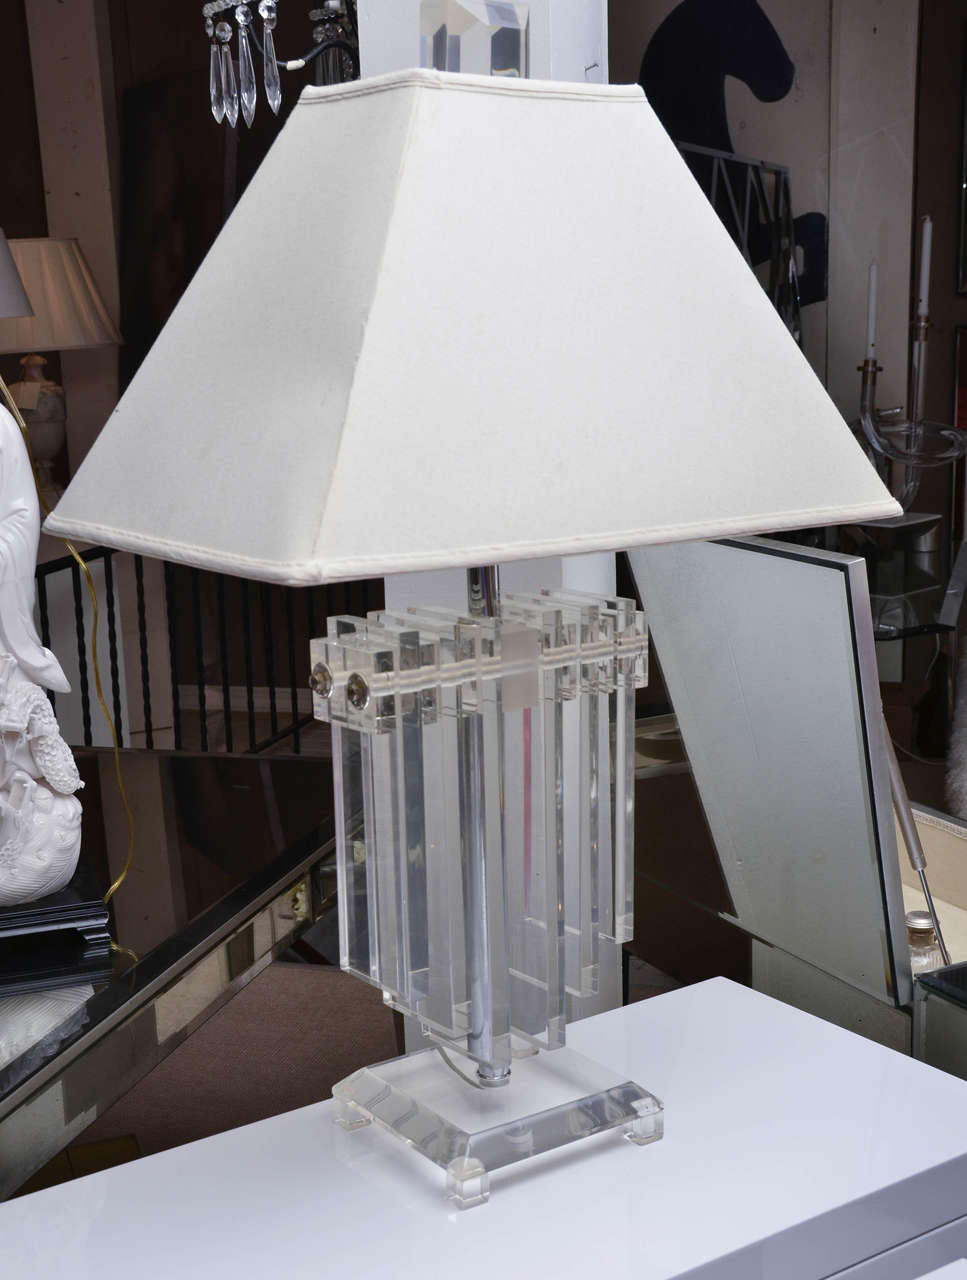 Vintage Lucite stack lamp with original custom shade. The vintage Lucite finial measures 3 x 3 x 3 in